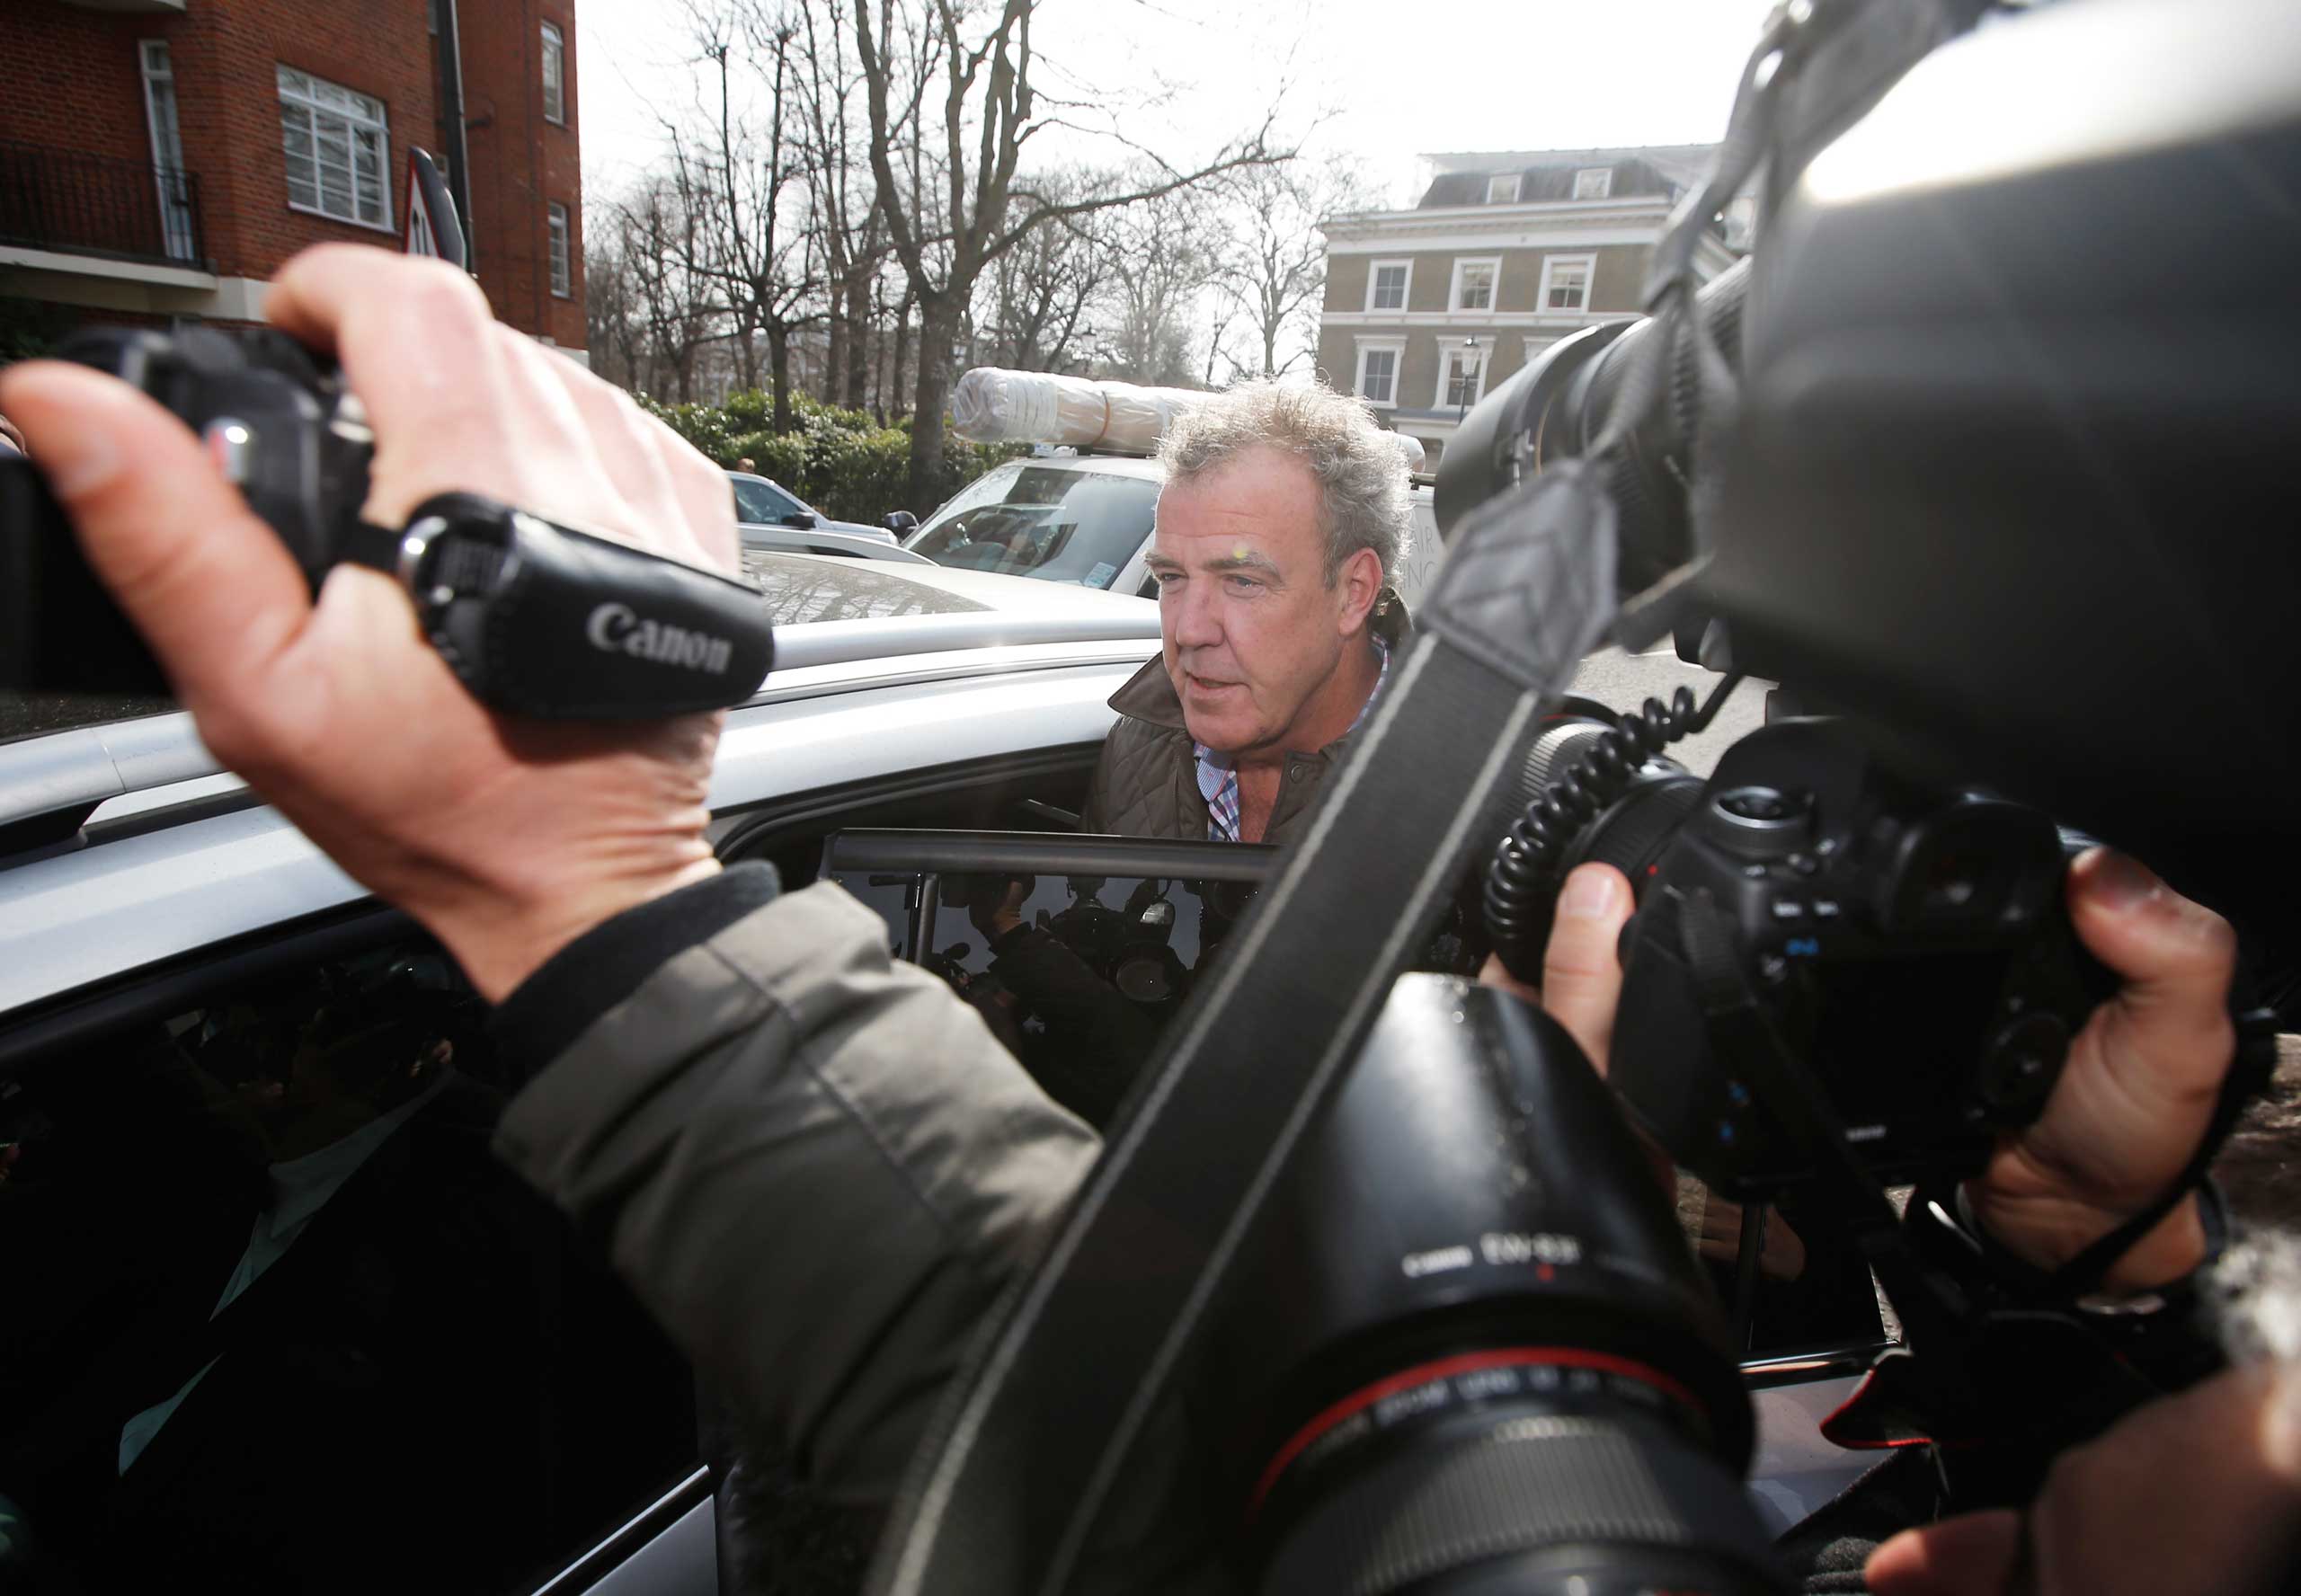 Jeremy Clarkson is mobbed by journalists in London, March 11, 2015. (Peter Nicholls—Reuters)